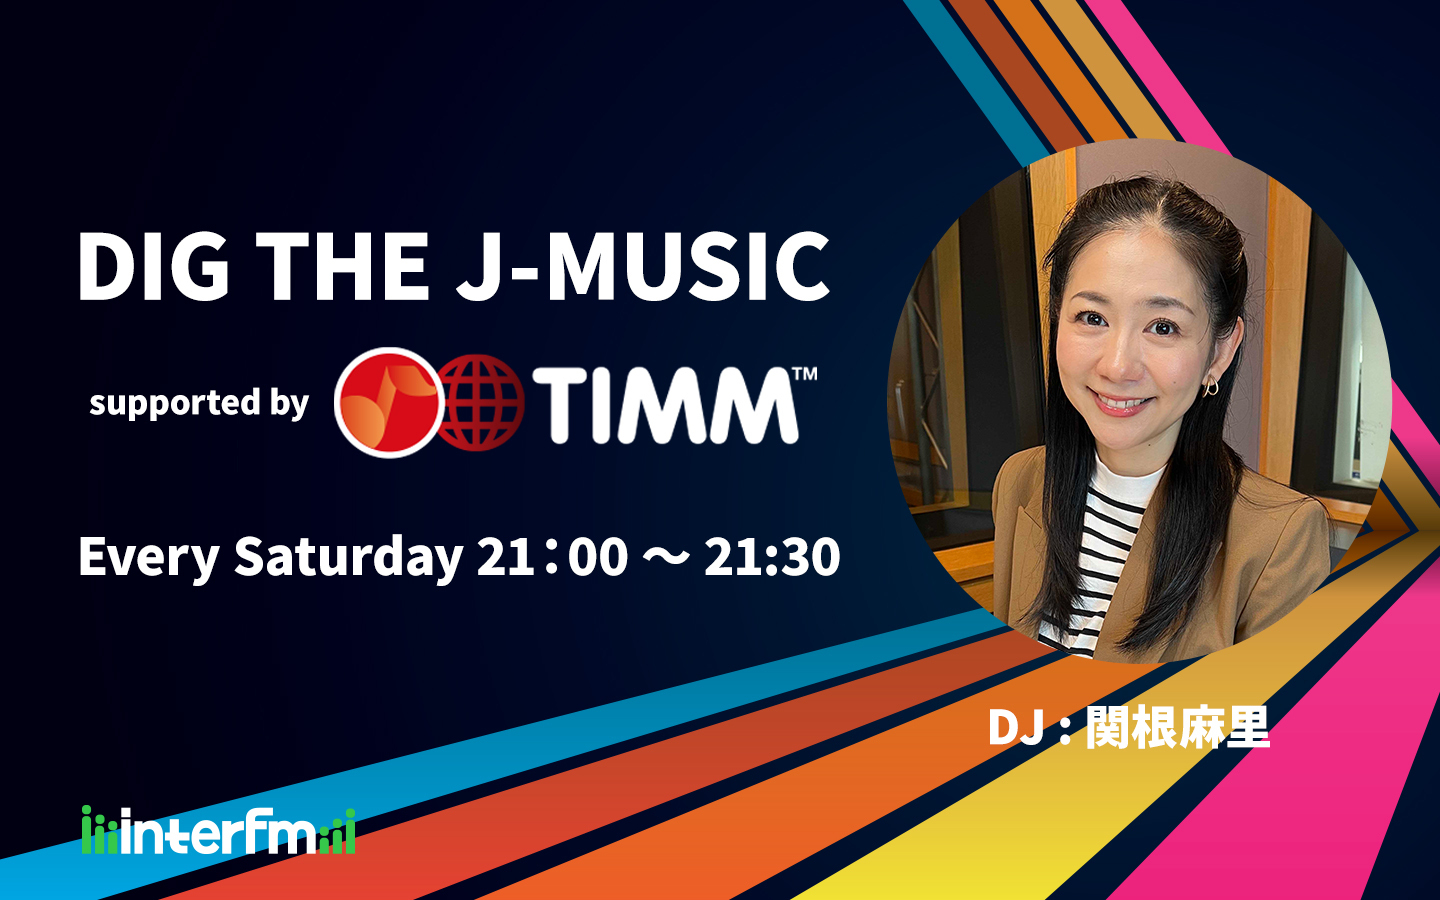 DIG THE J-MUSIC supported by TOKYO INTERNATIONAL MUSIC MARKET